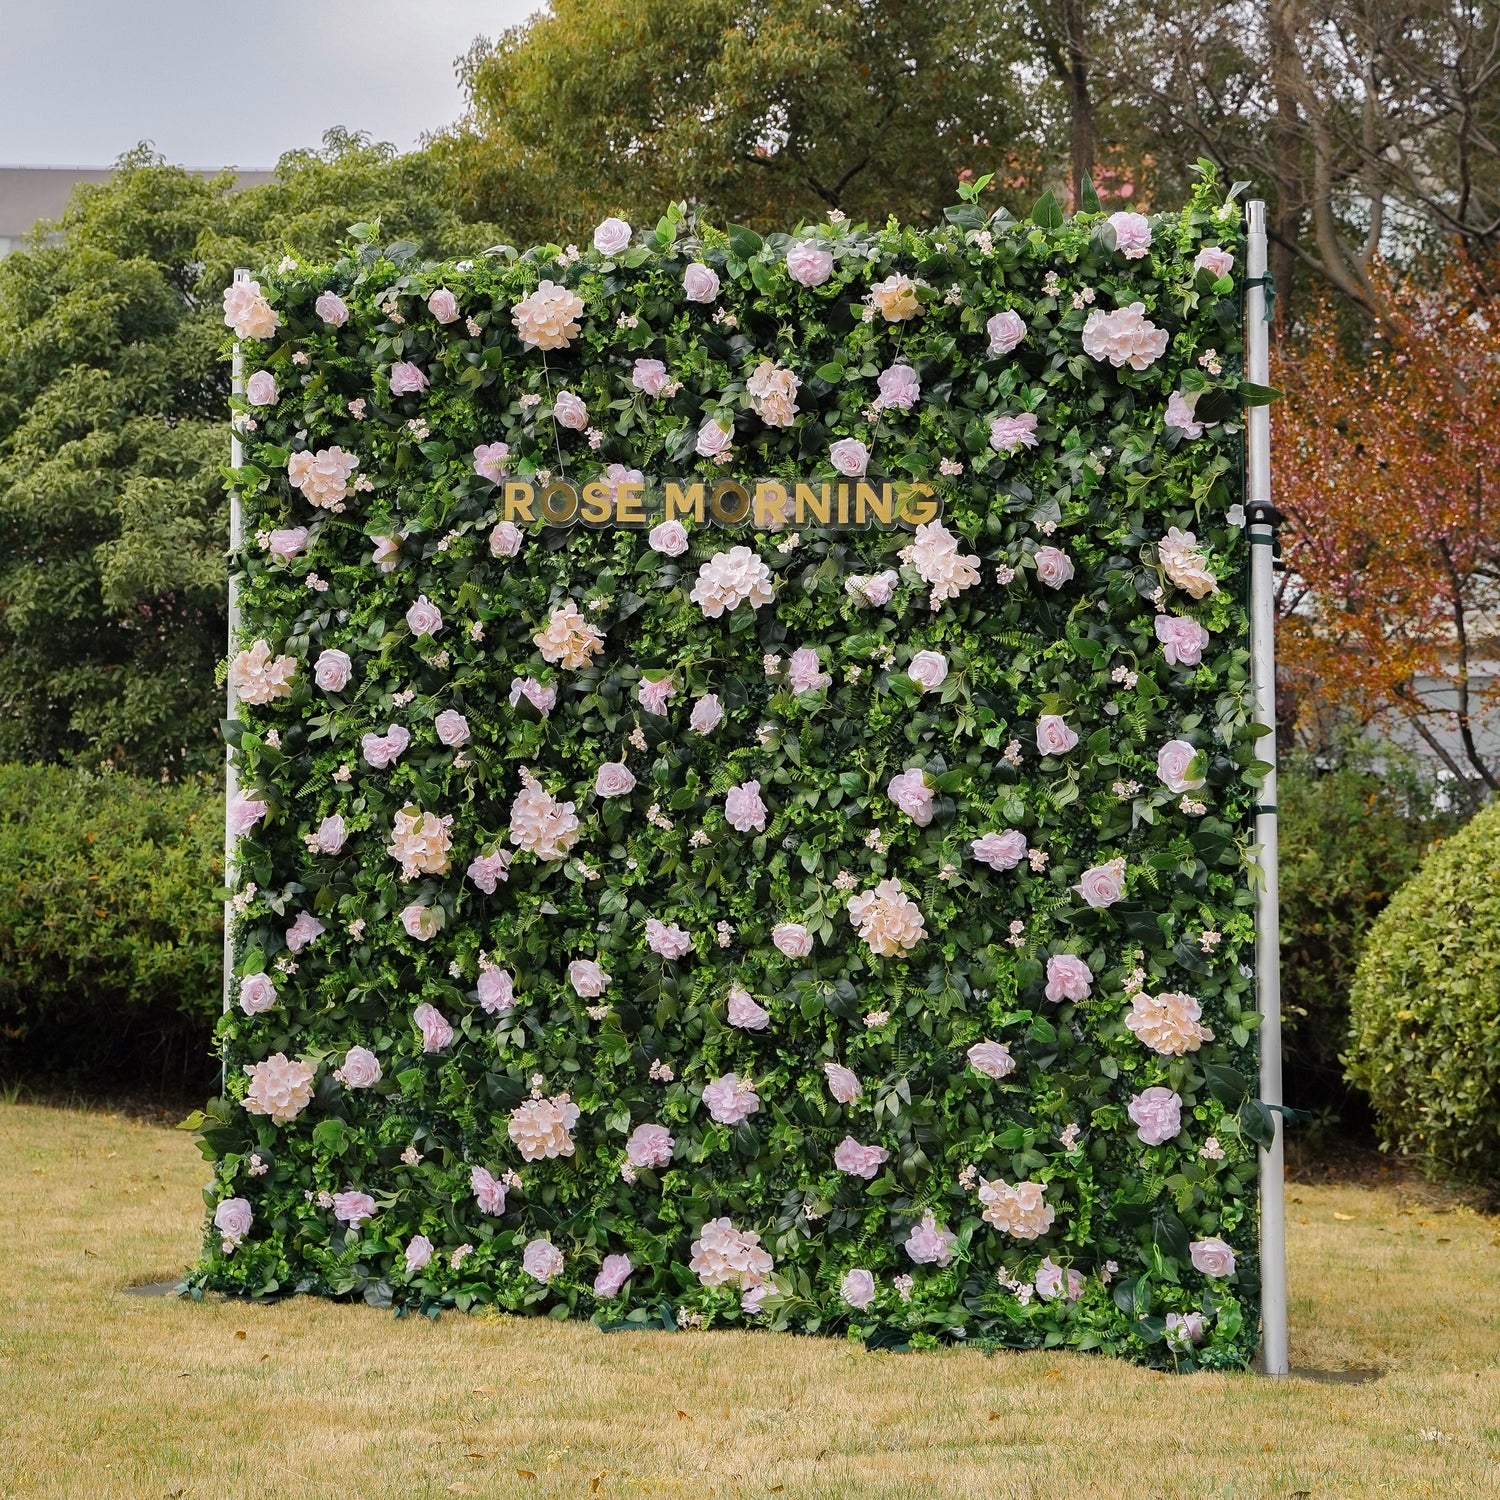 Sugar： Fabric Artificial zip up curtain flower wall 8ft*8ft (SHIP TO USA ONLY) Rose Morning